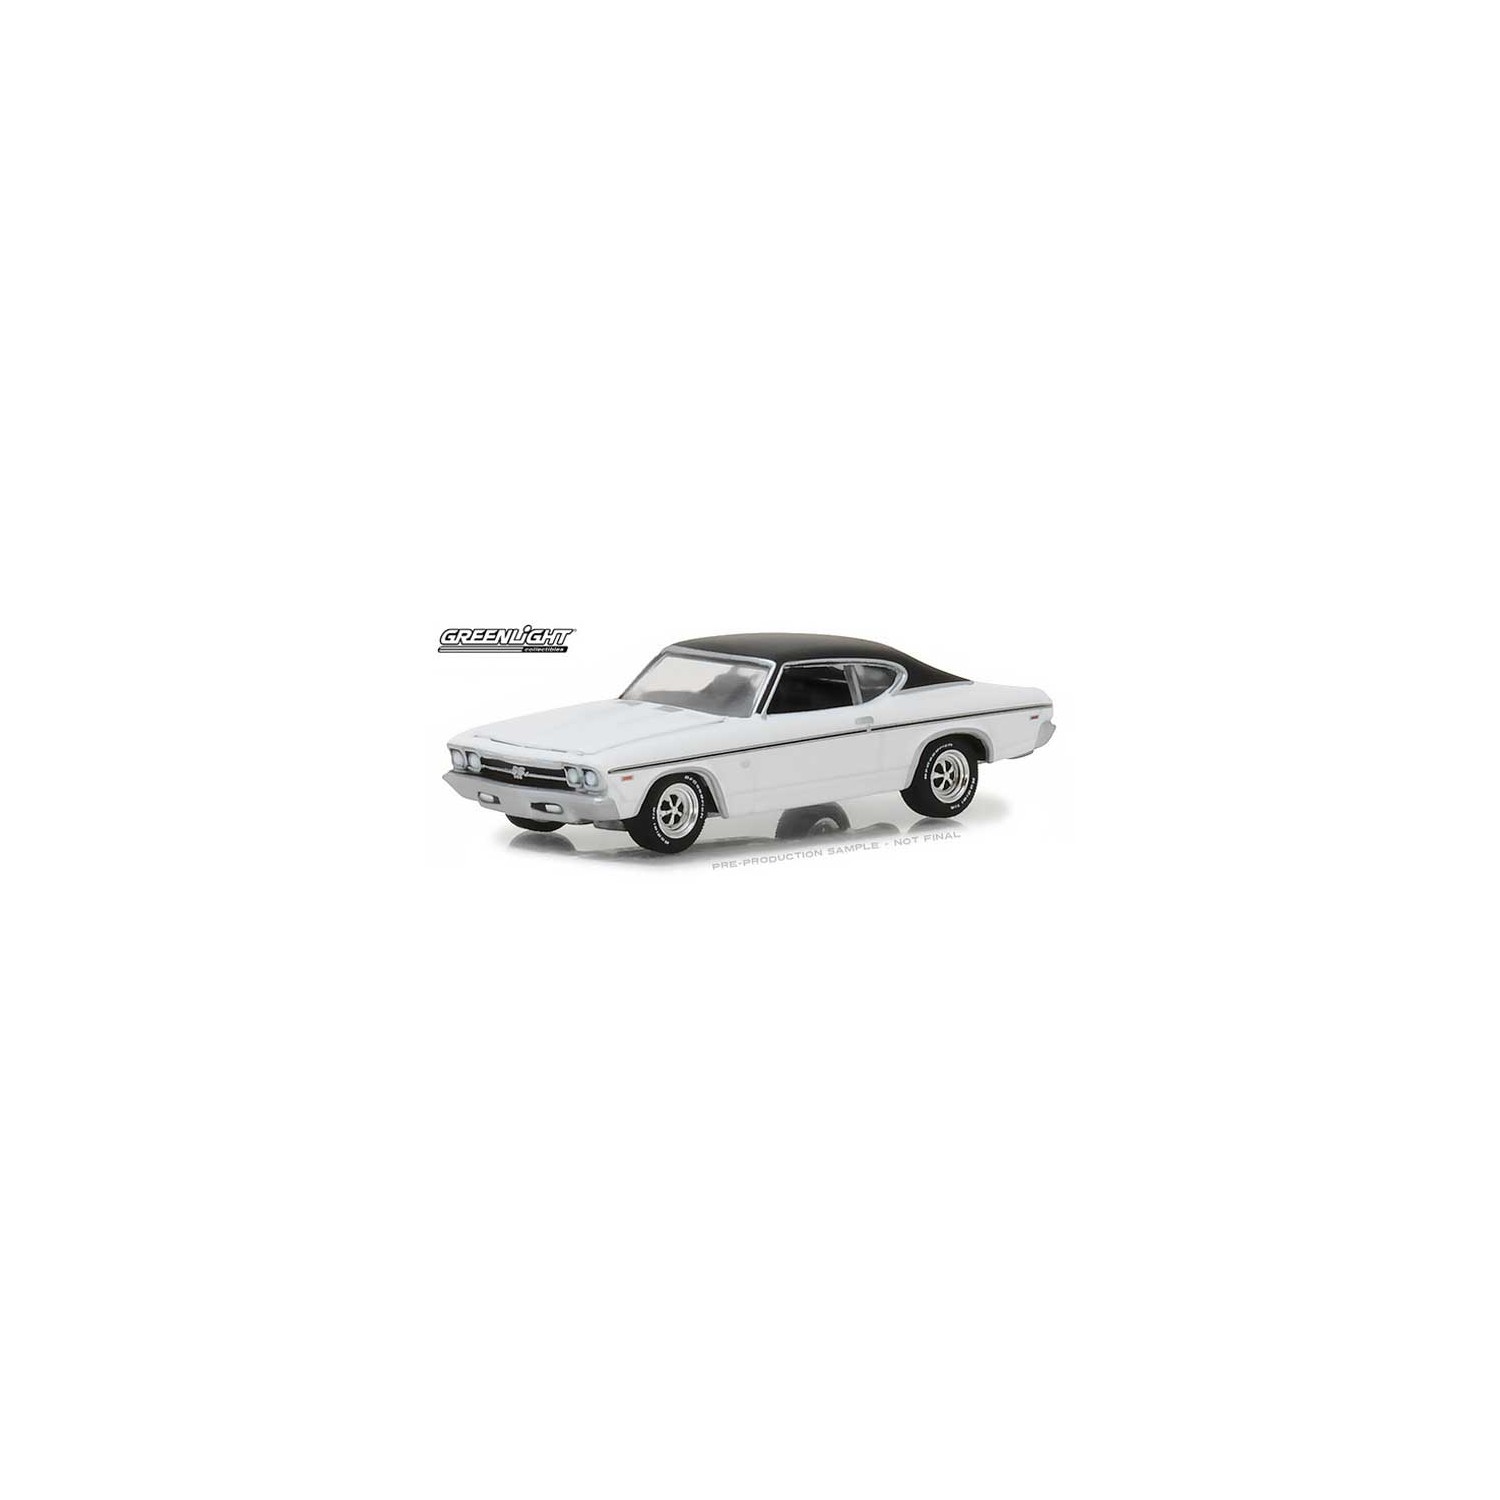 Greenlight GL Muscle Series 20 - 1969 Chevrolet Chevelle SS 396